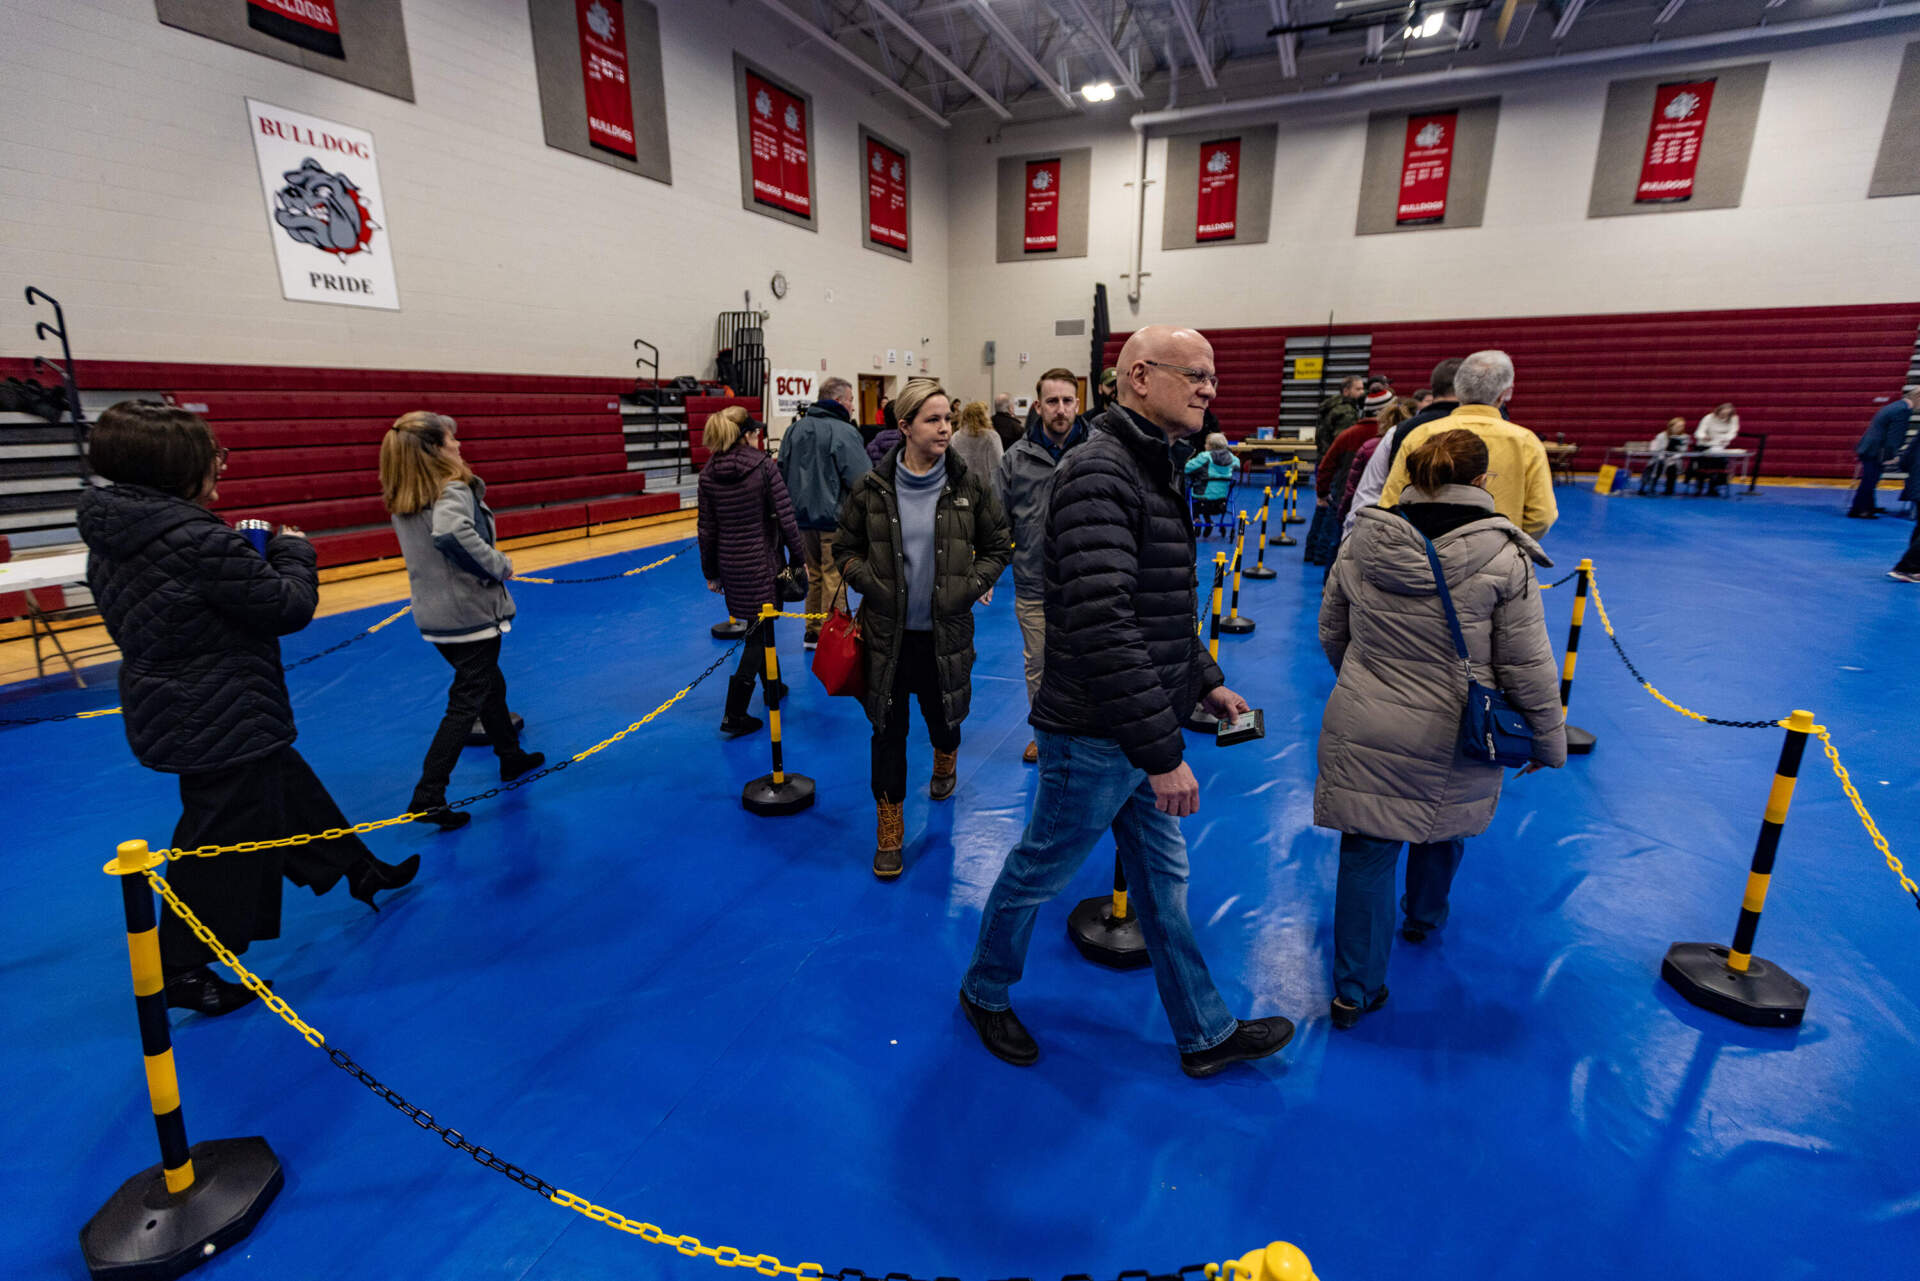 Voters at Bedford High School walk through ropes in line to collect their ballots to vote. (Jesse Costa/WBUR)